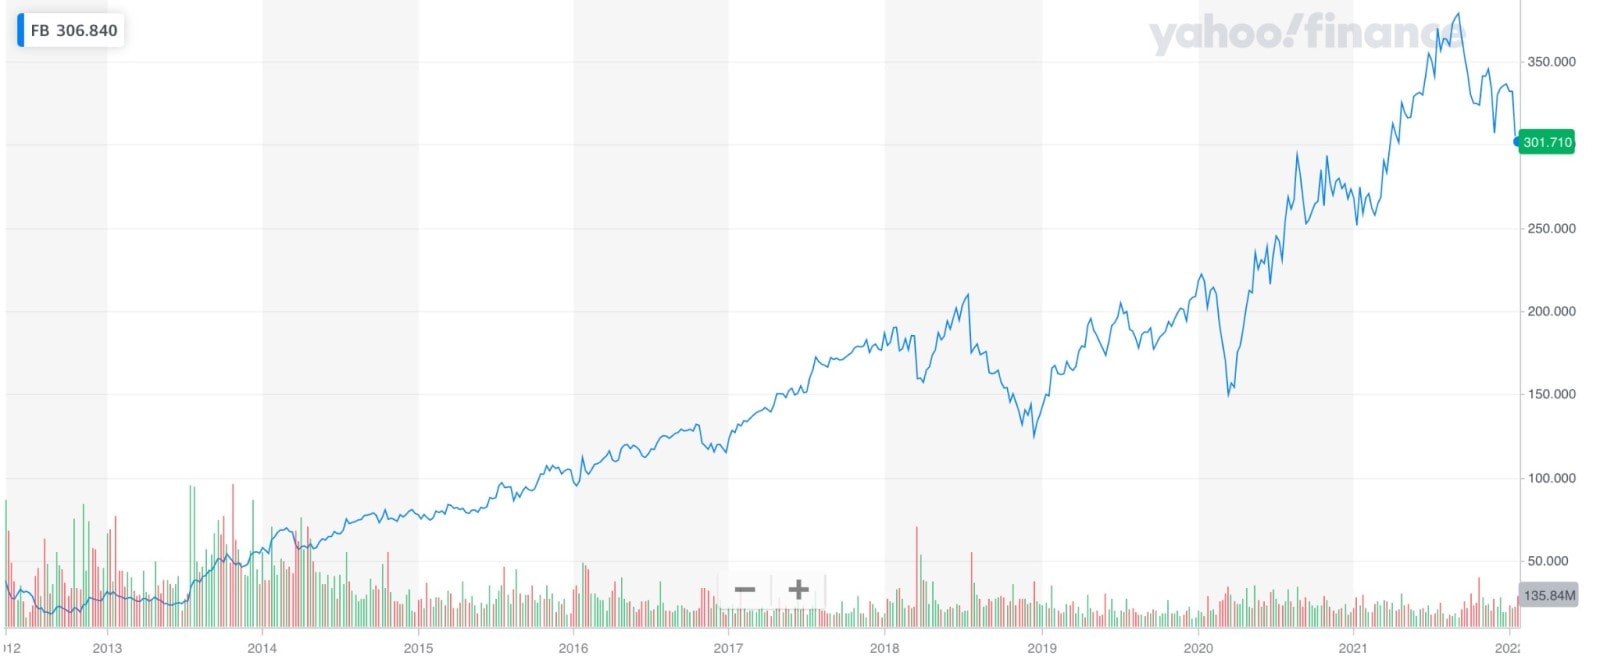 Facebook's historical chart